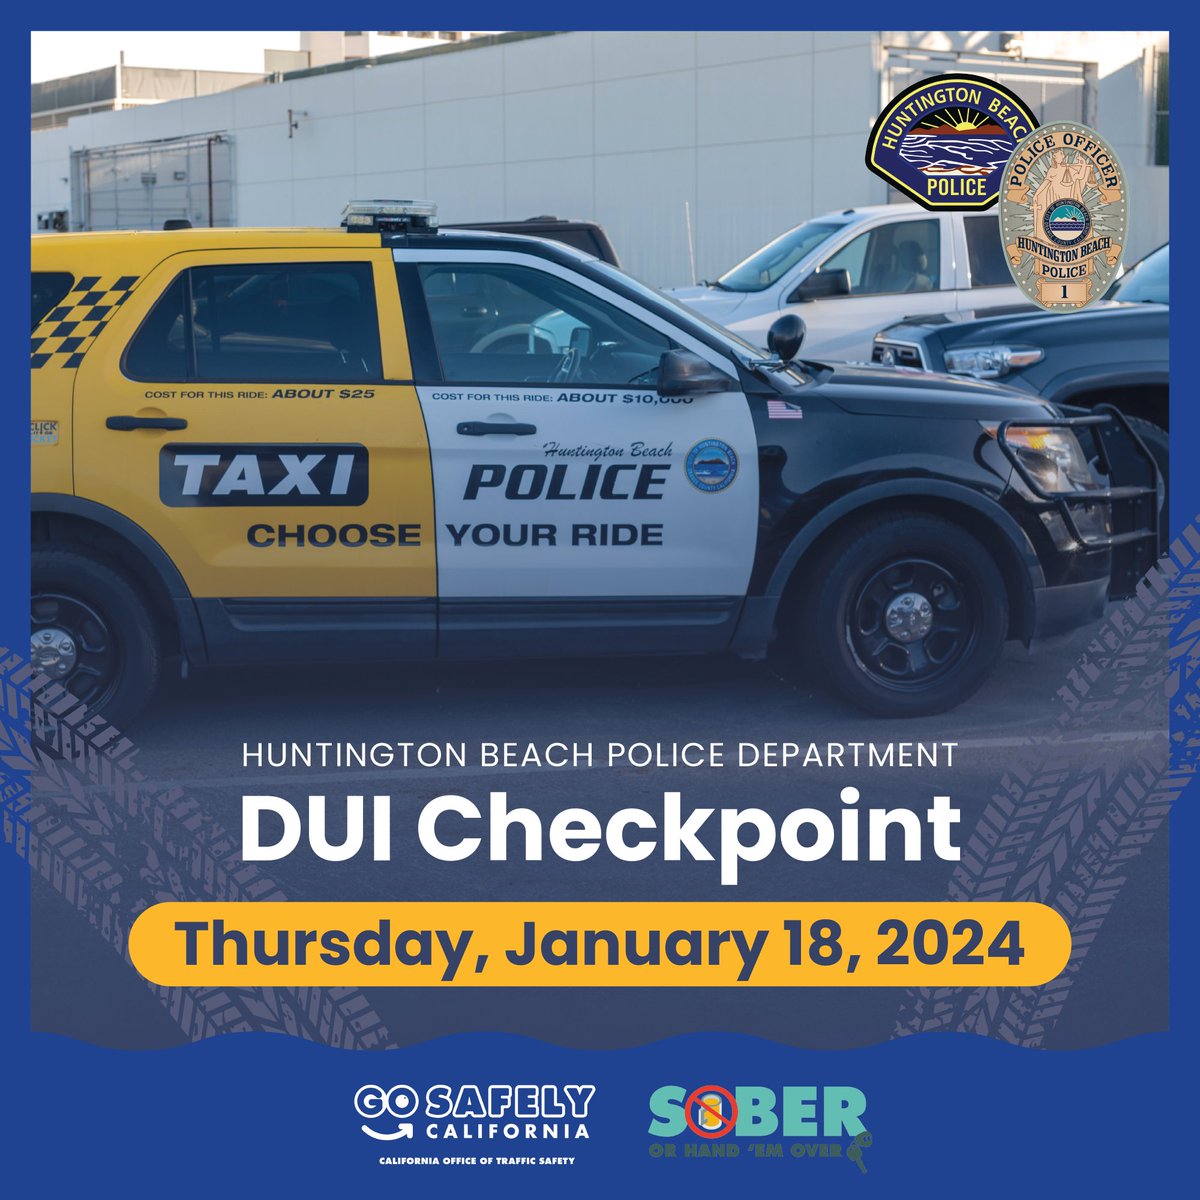 We will be conducting a DUI checkpoint tonight, btw 6 pm & 2 am, within the City limits. The location has been selected based on DUI crash & arrest statistics. The NHTSA provided funding for the checkpoint. For the press release, please click: bit.ly/HBPDPressRelea….